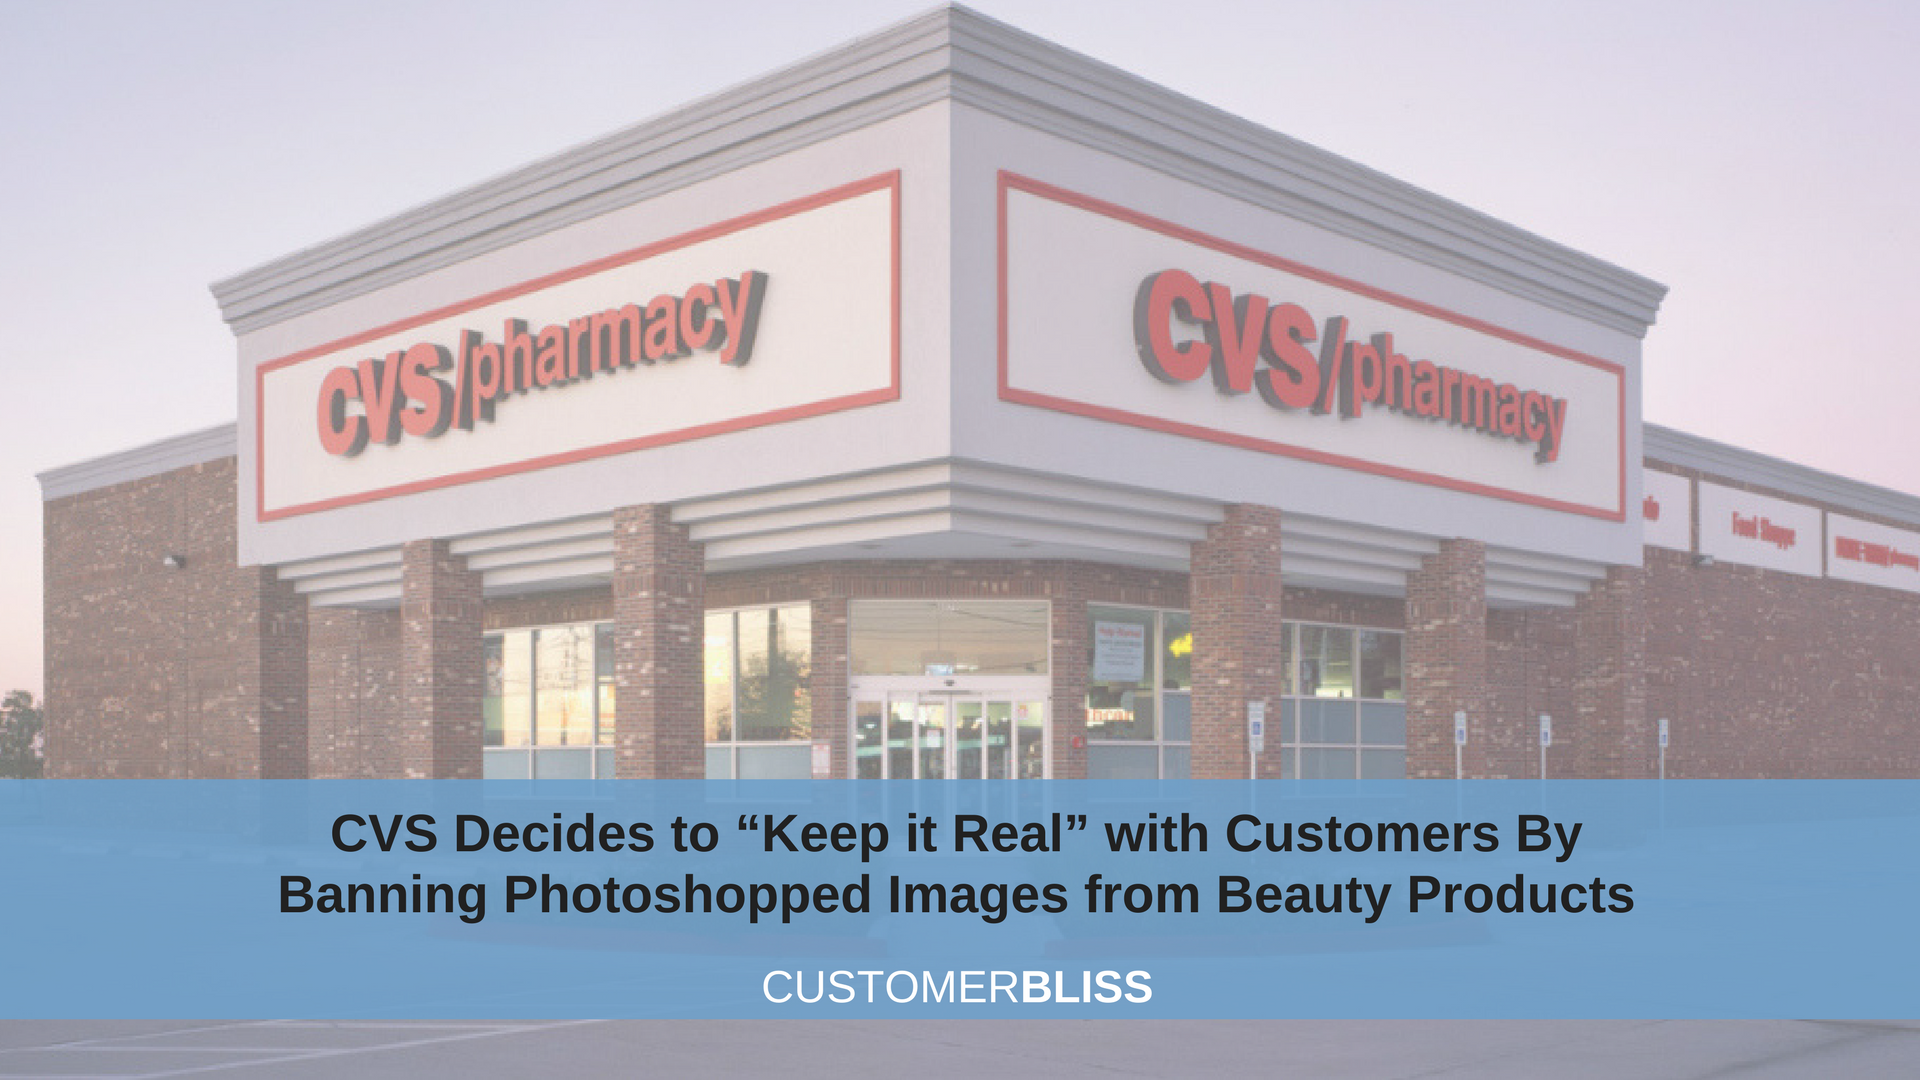 CVS DECIDES TO “KEEP IT REAL” WITH CUSTOMERS BY BANNING PHOTOSHOPPED IMAGES FROM BEAUTY PRODUCTS